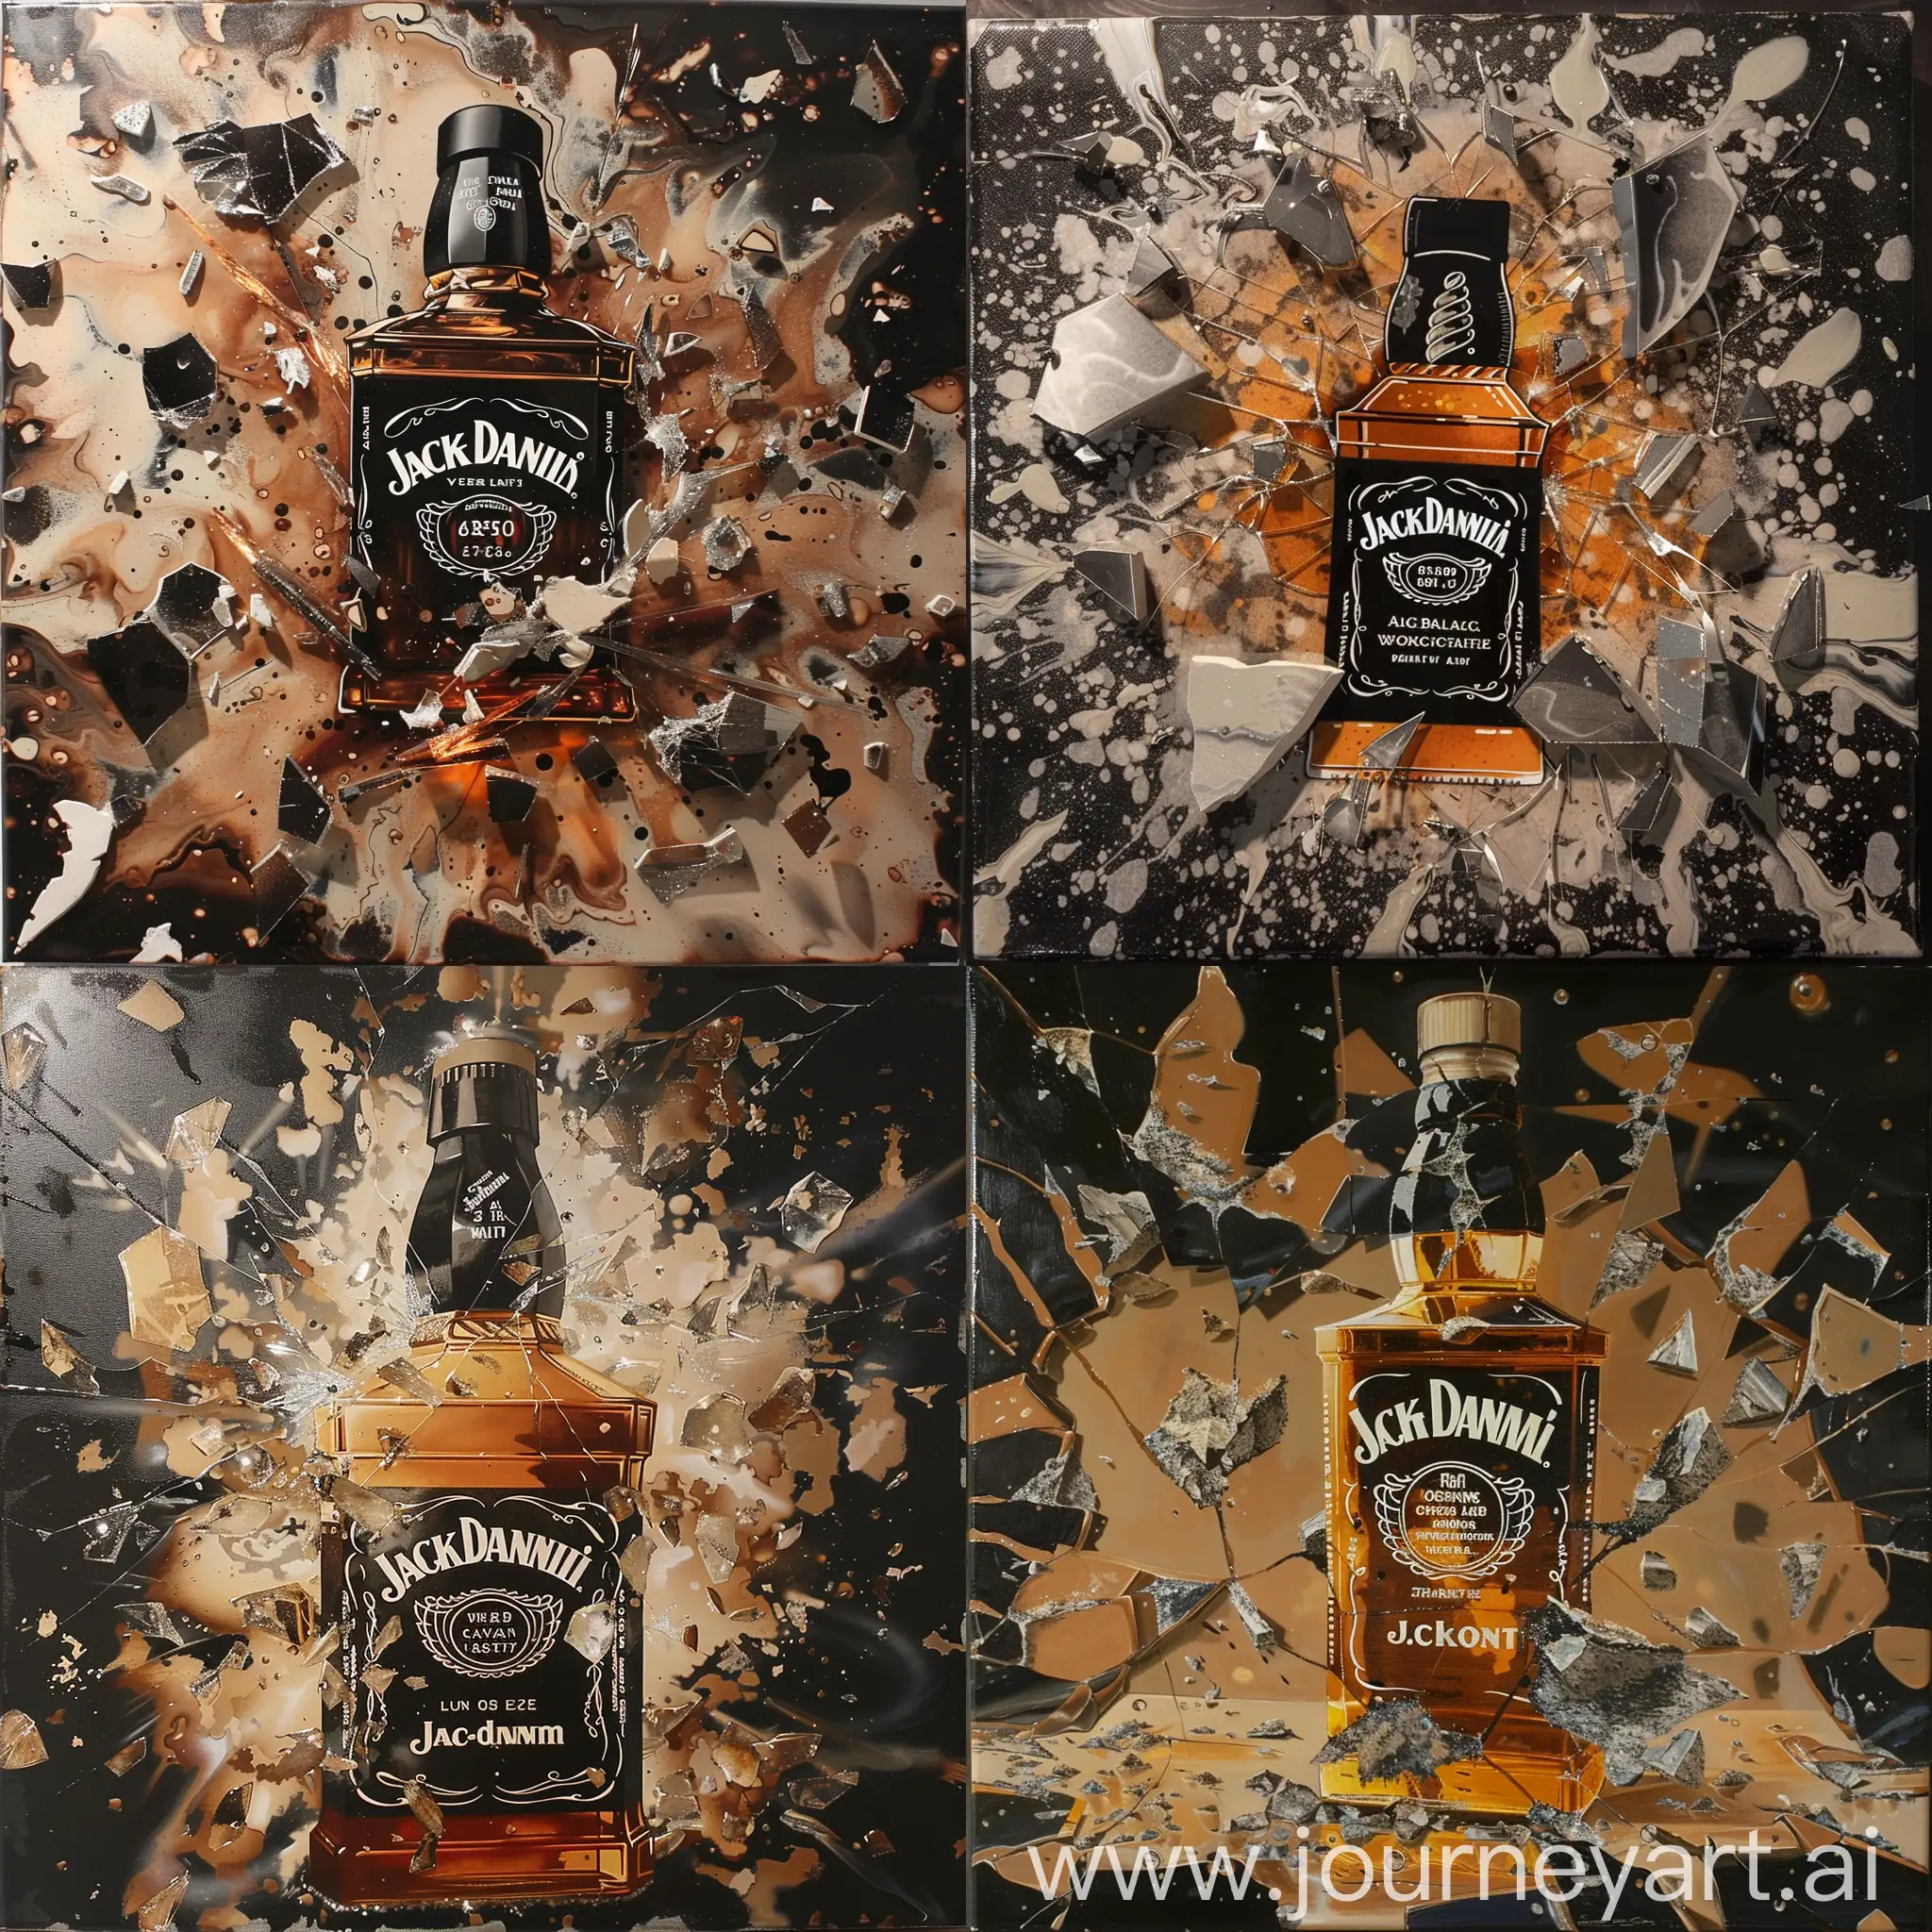 A shaterd jack daniels bottle, on a canvas filled with epoxy,